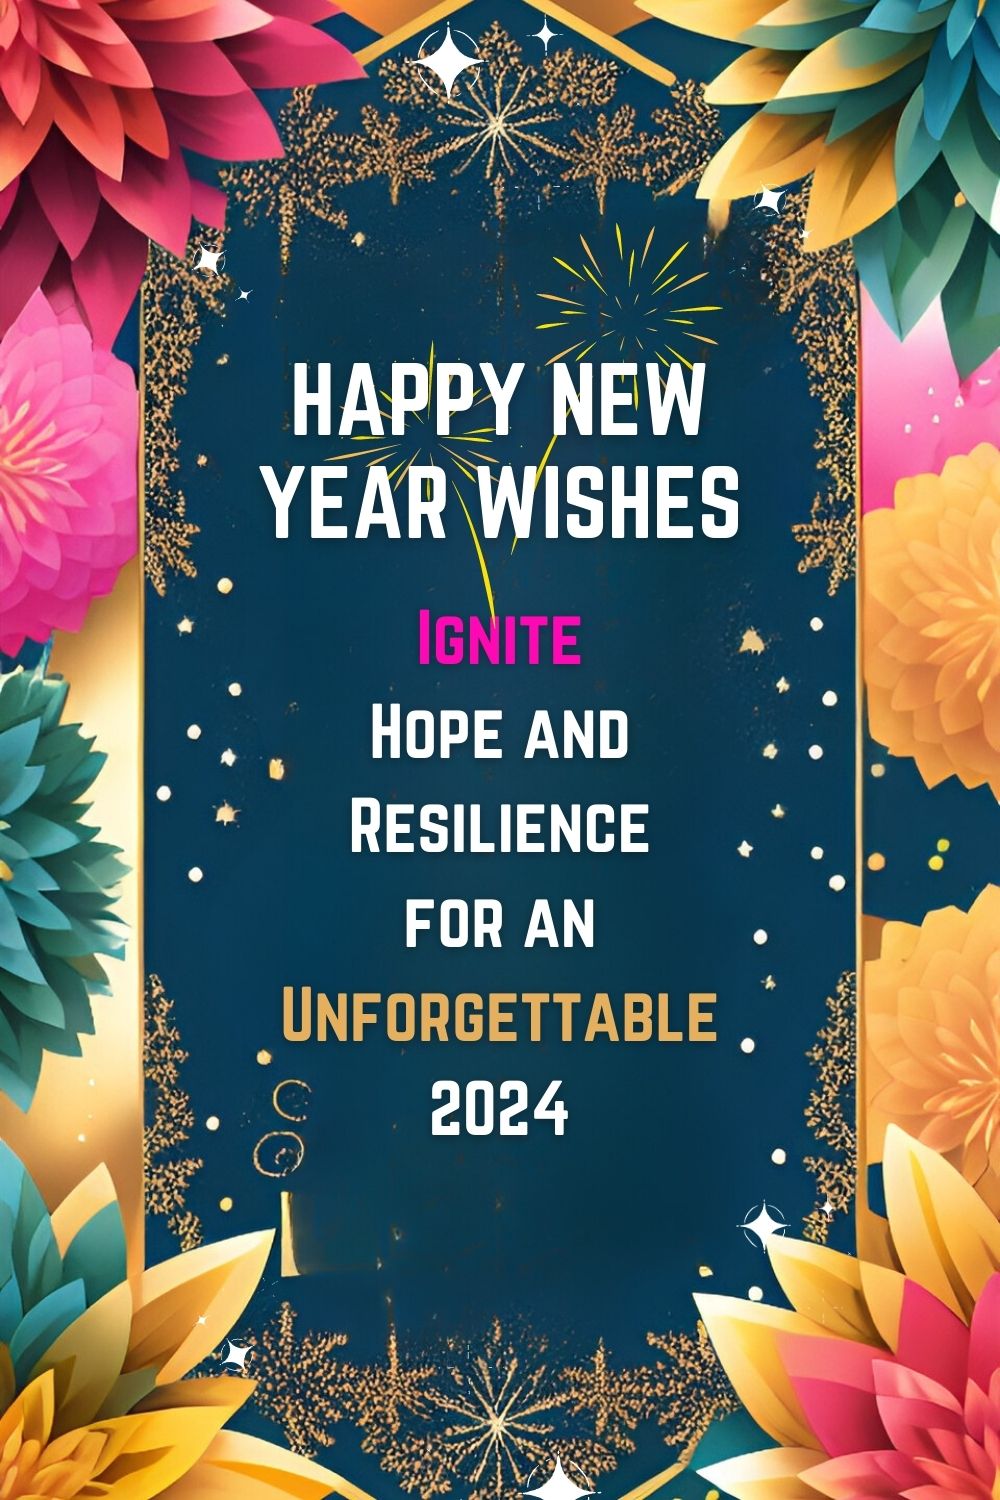 100 Inspirational New Year Quotes for 2024